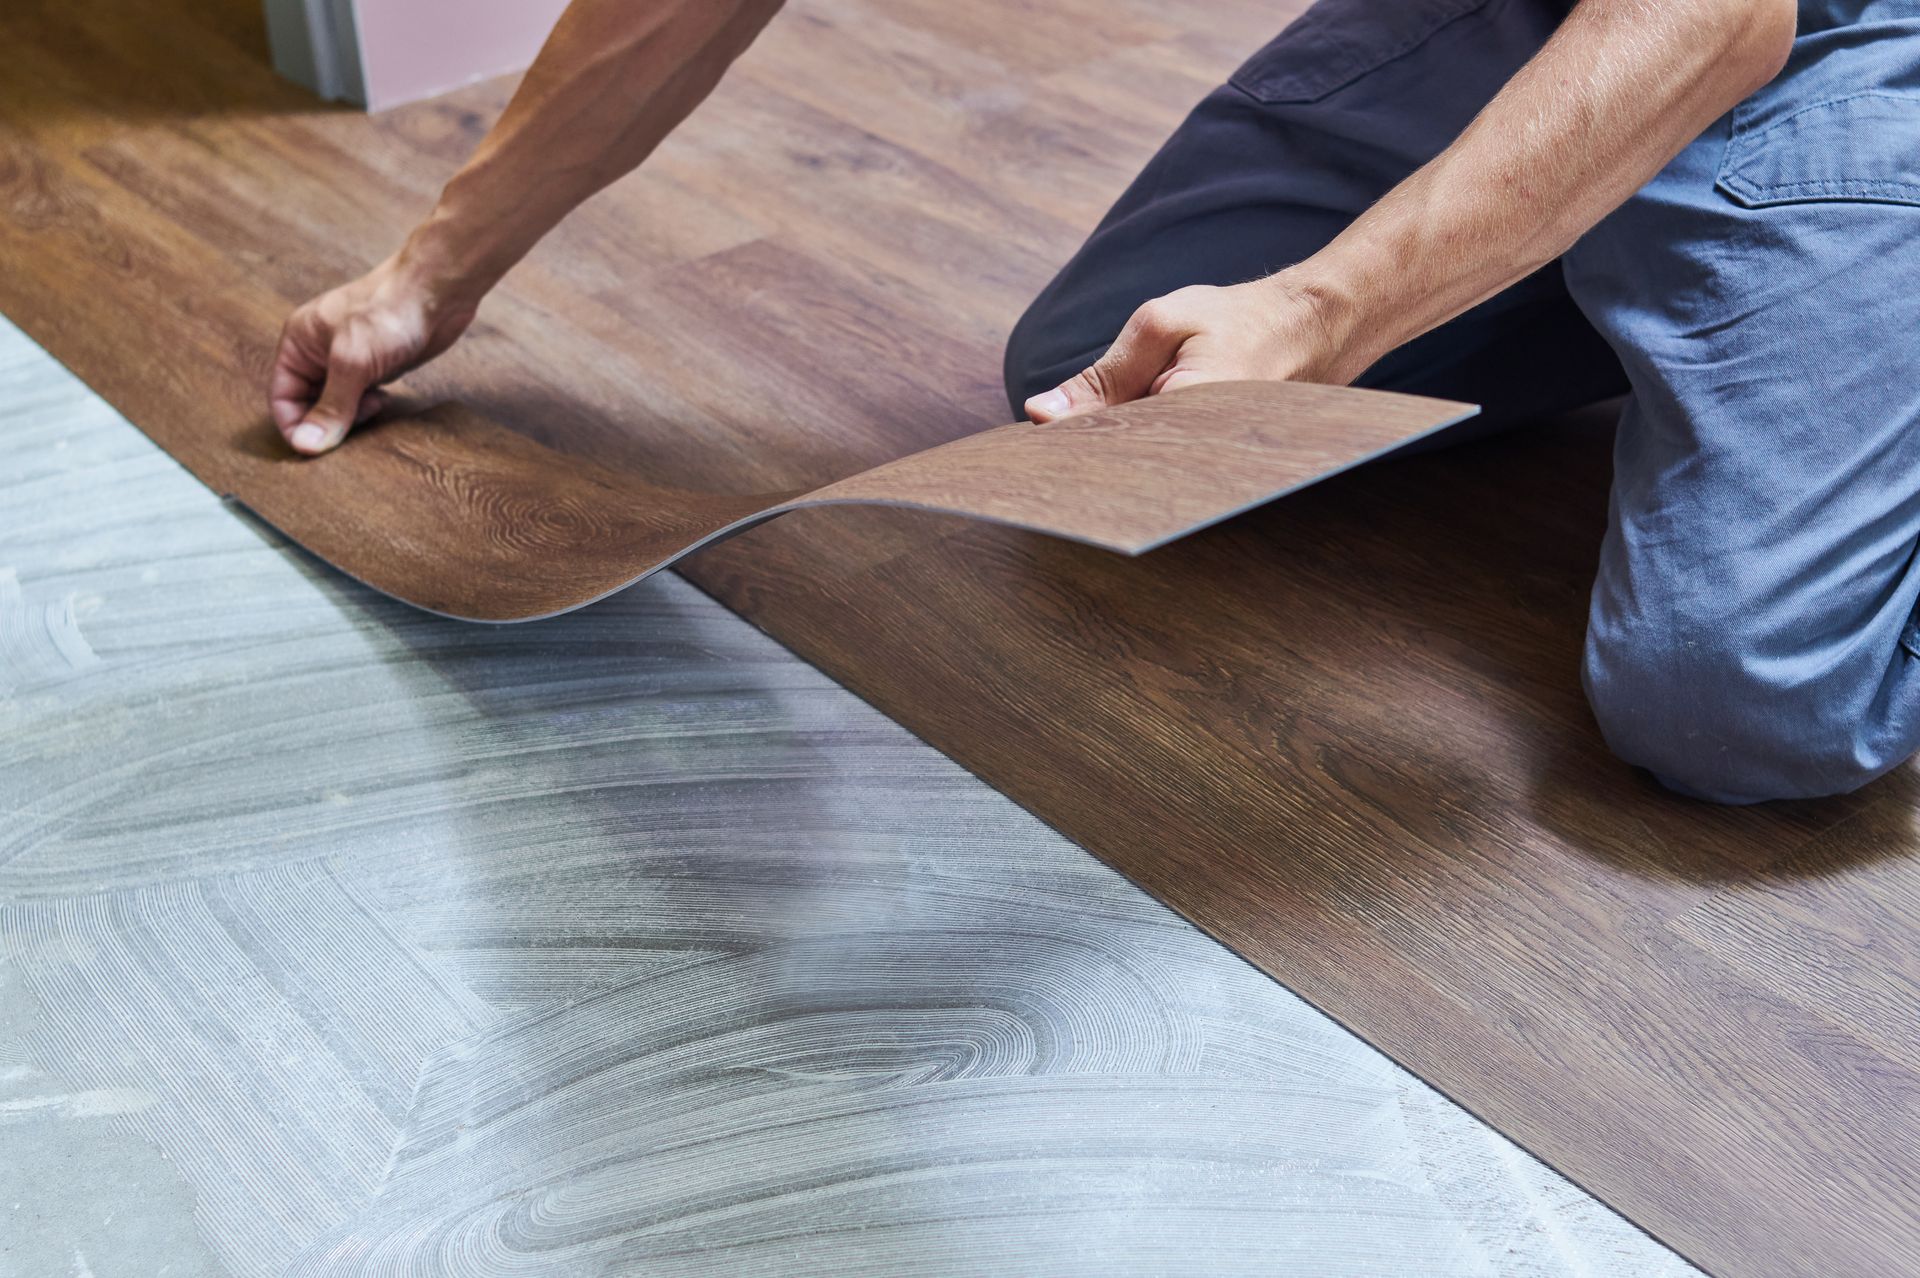 A professional handyman carefully laying vinyl flooring planks in a room.